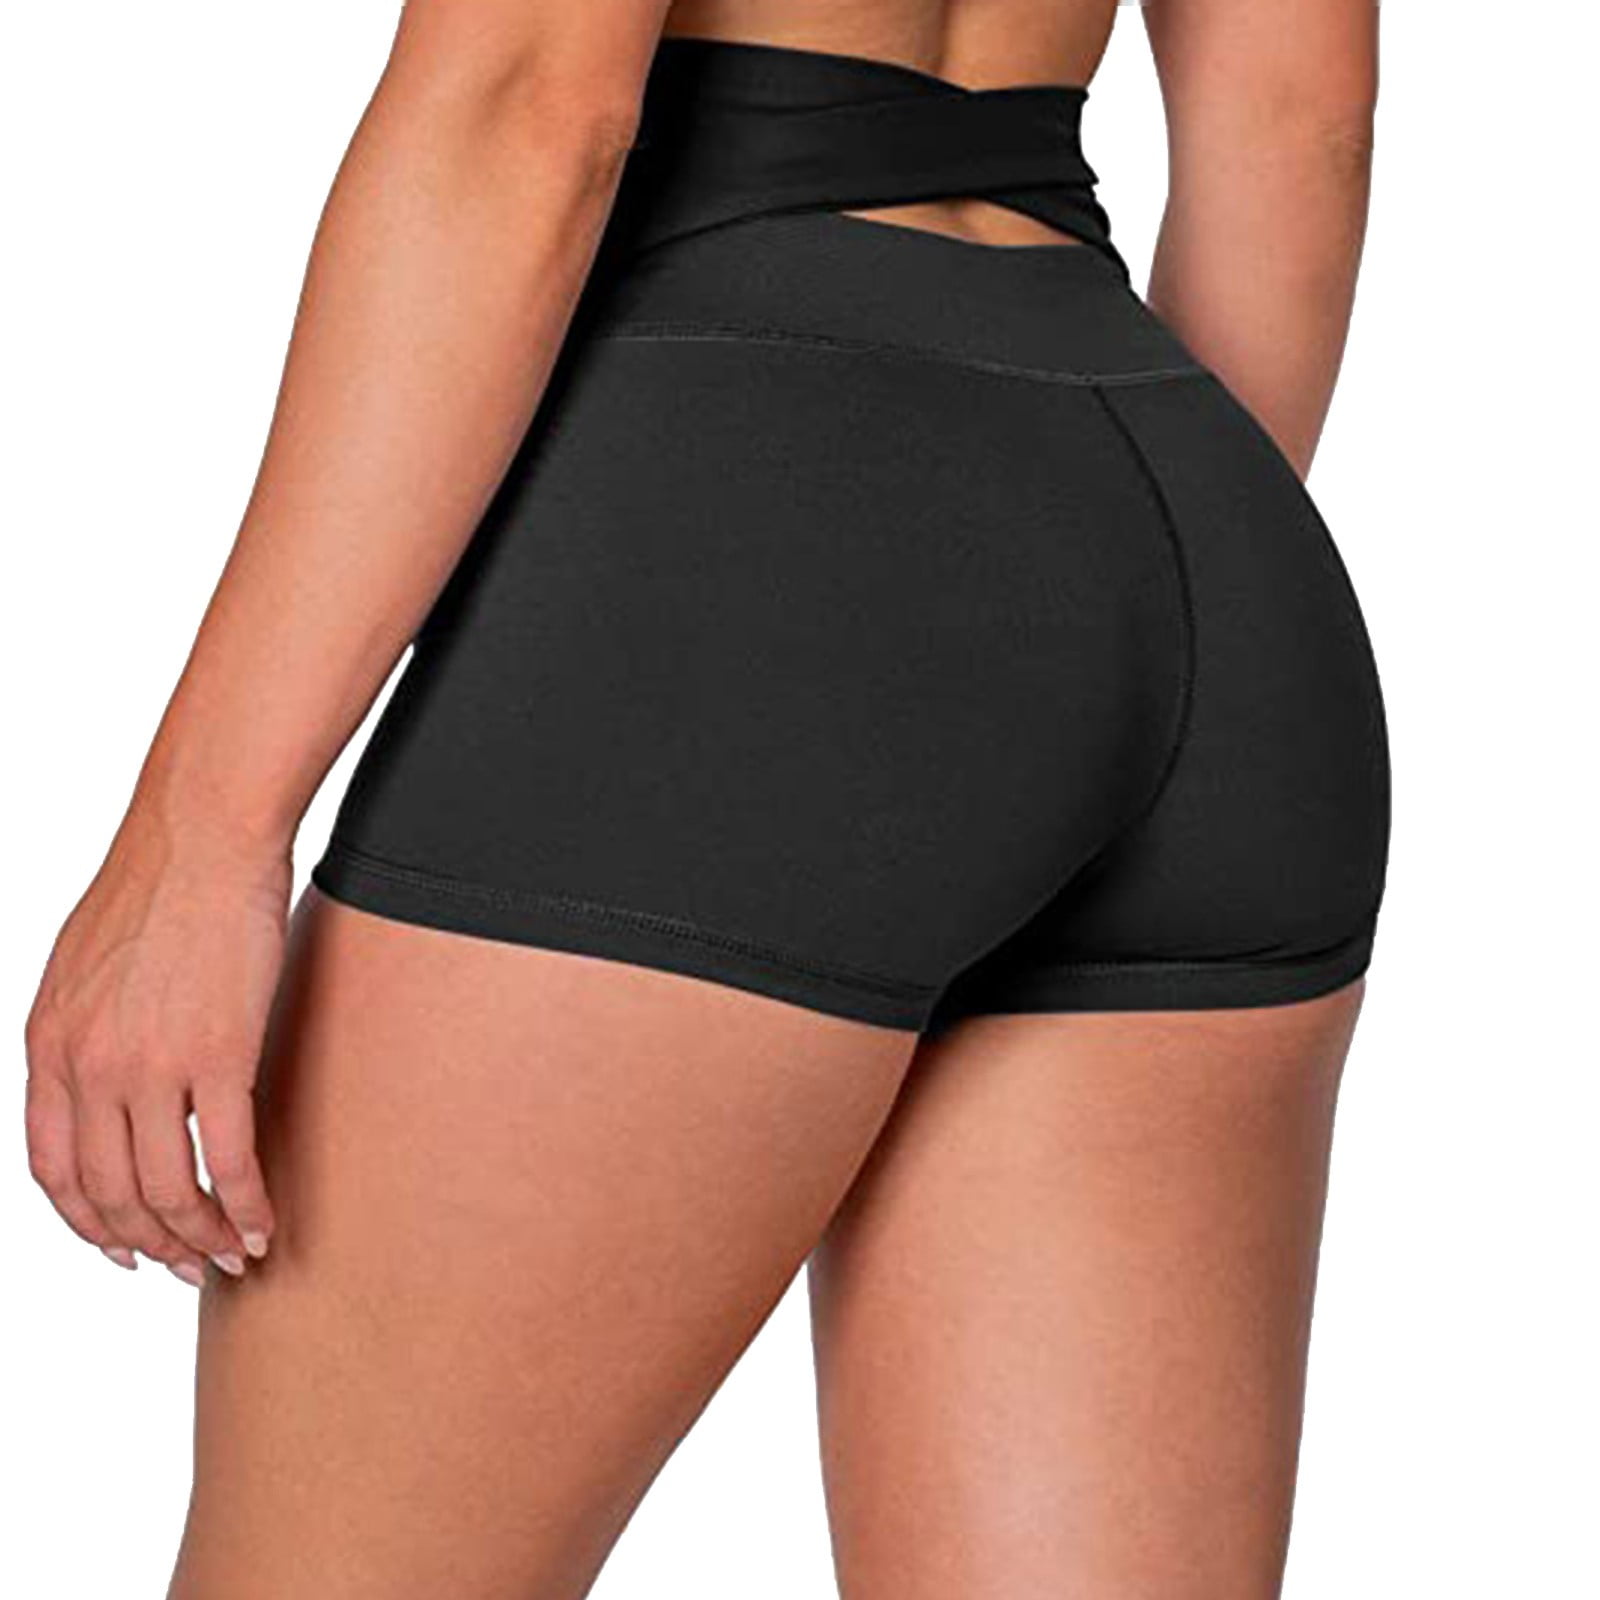 BSDHBS Gym Shorts Women's Back Waist Strap High Waist Tight Fitness Solid  Color Stretch Yoga Pants 